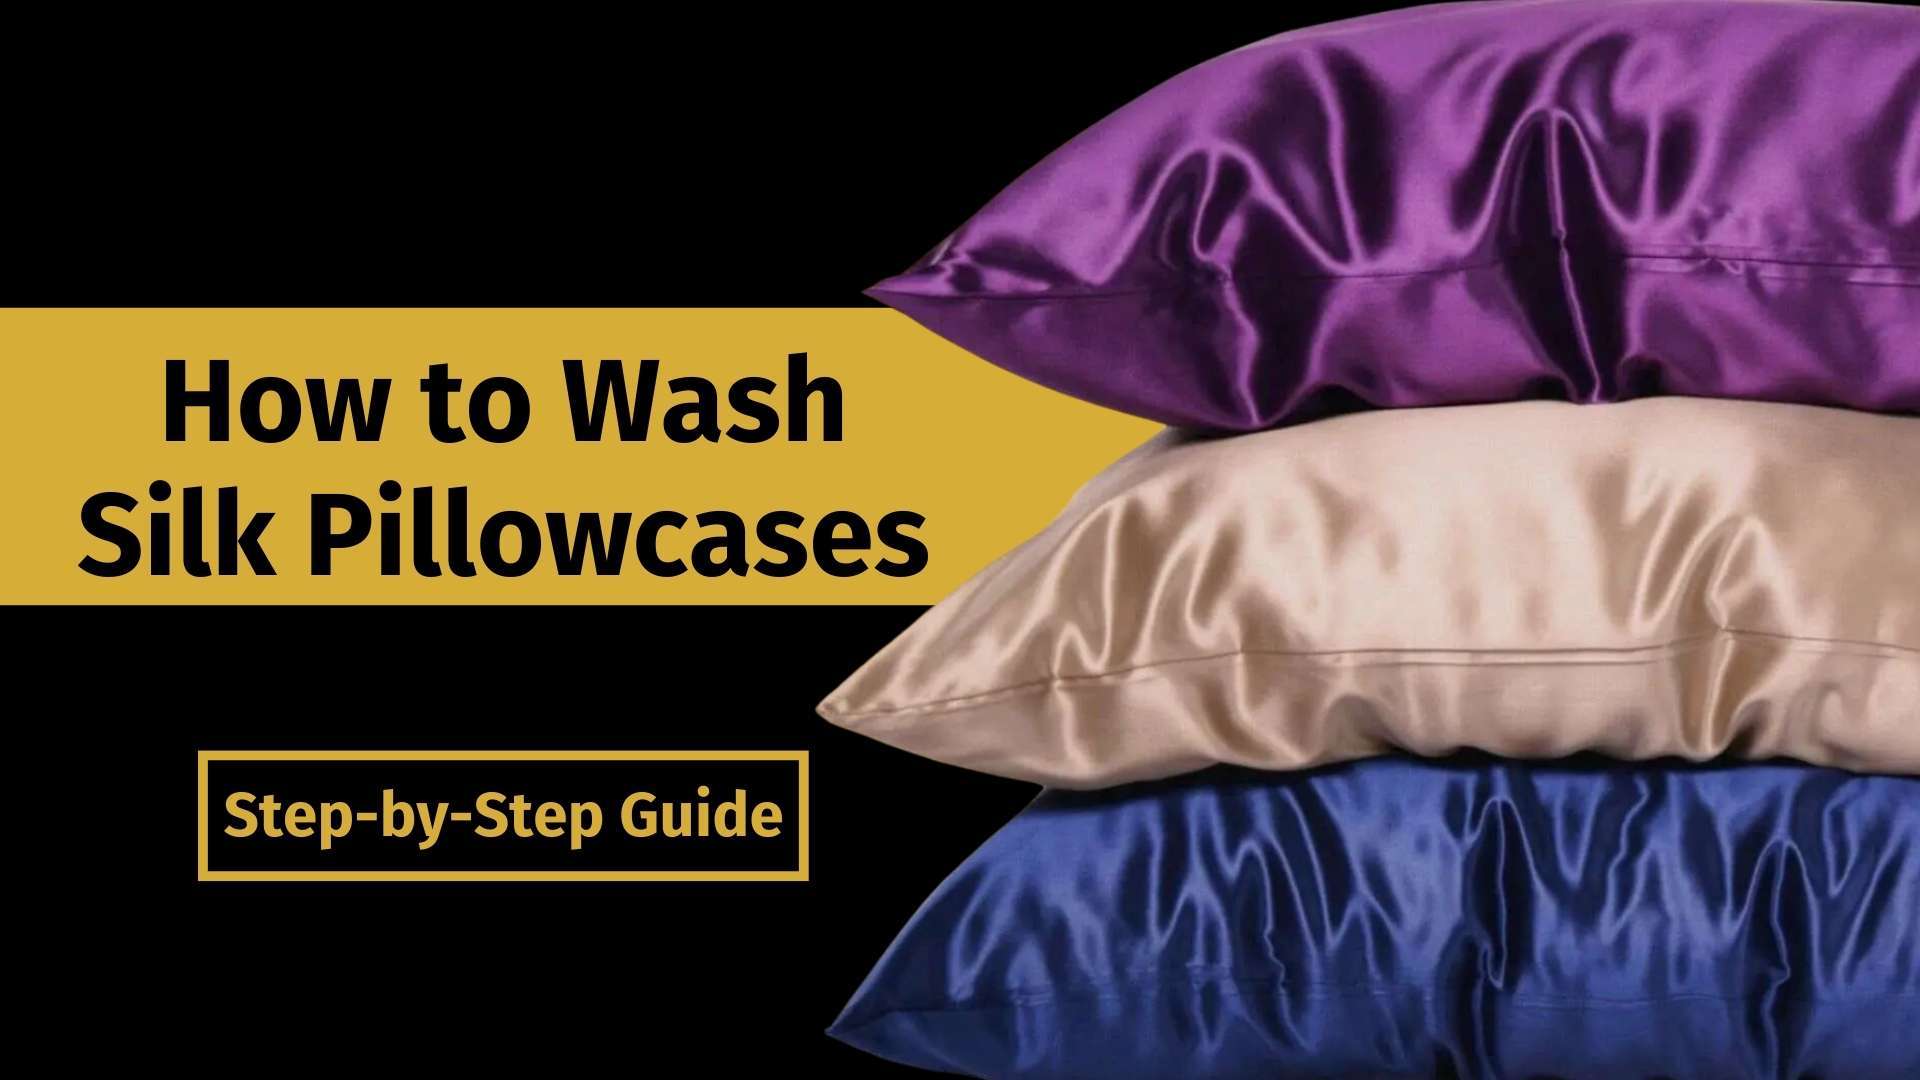 how to wash silk pillowcases banner image with a picture of blue, gold, and purple silk pillowcases stacked on top of each other